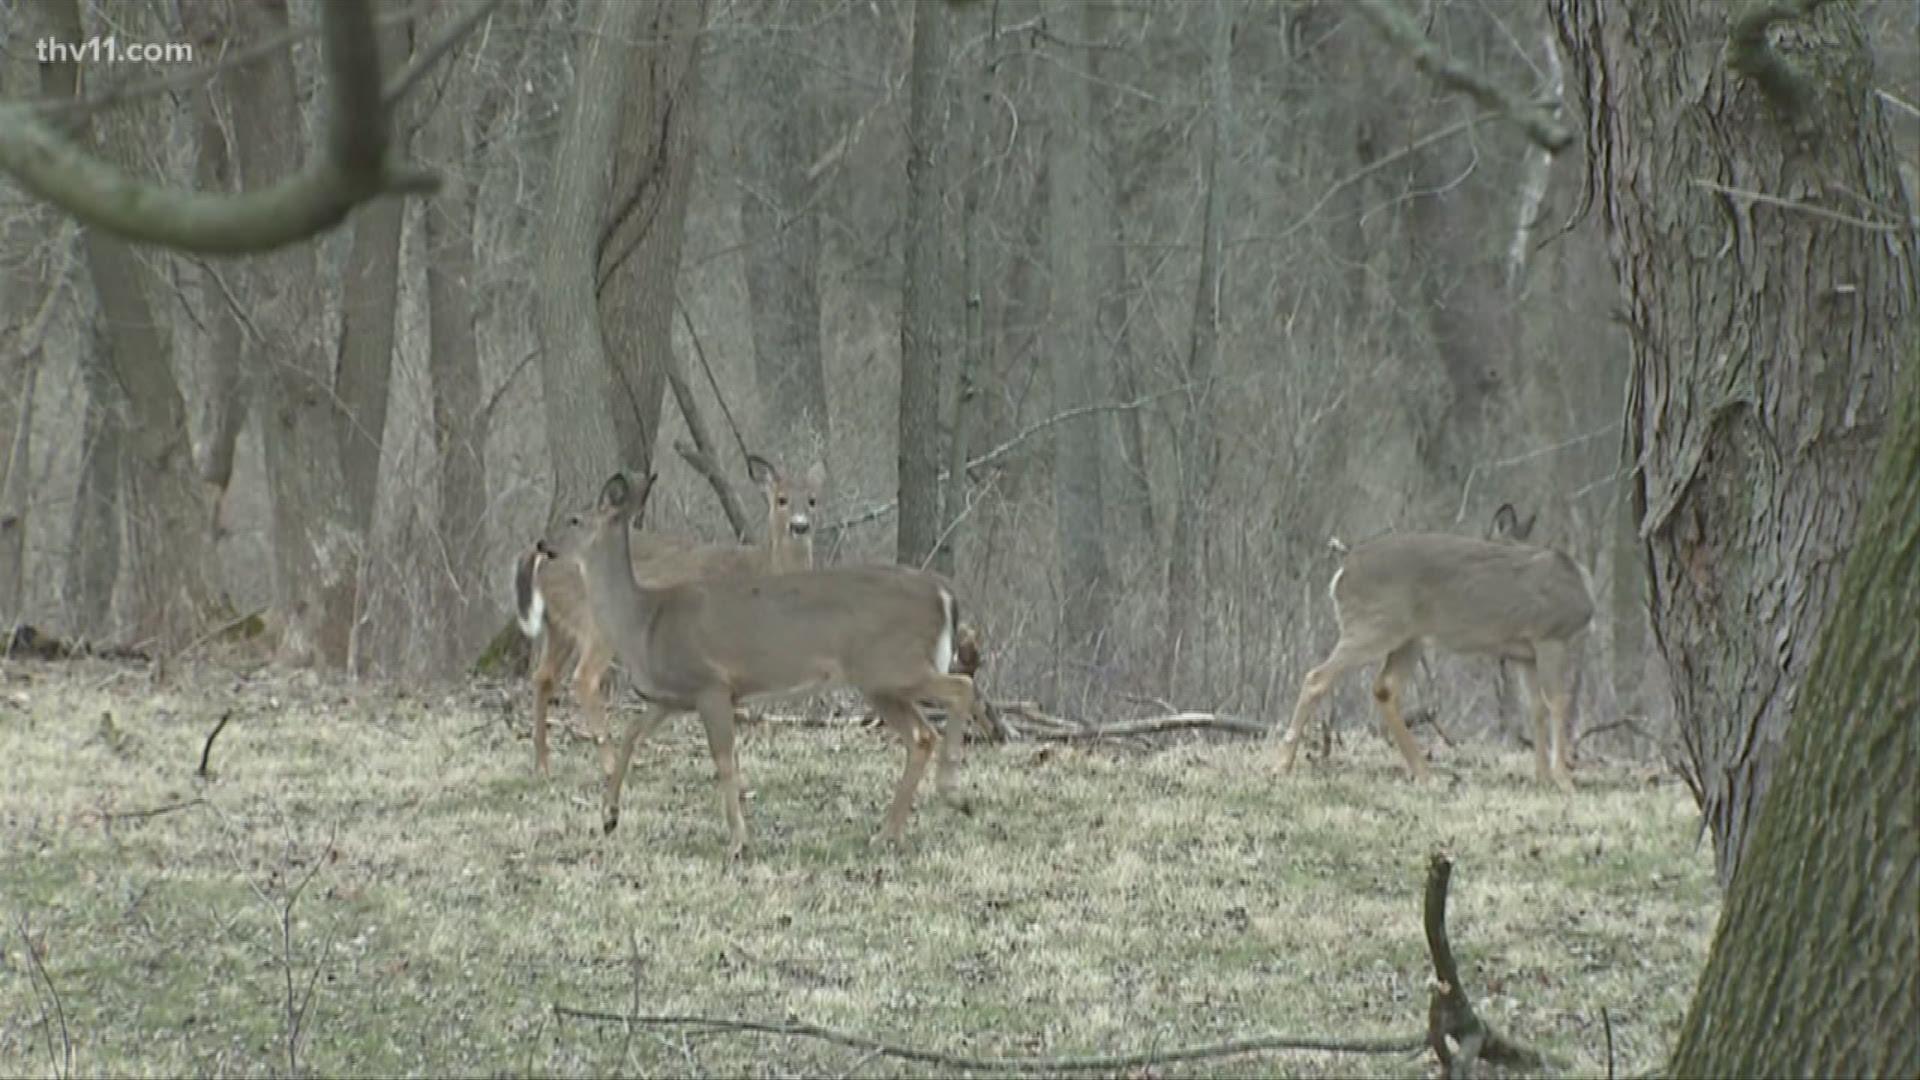 The Arkansas Game and Fish Commission is asking hunters for help reporting Chronic Wasting Disease.